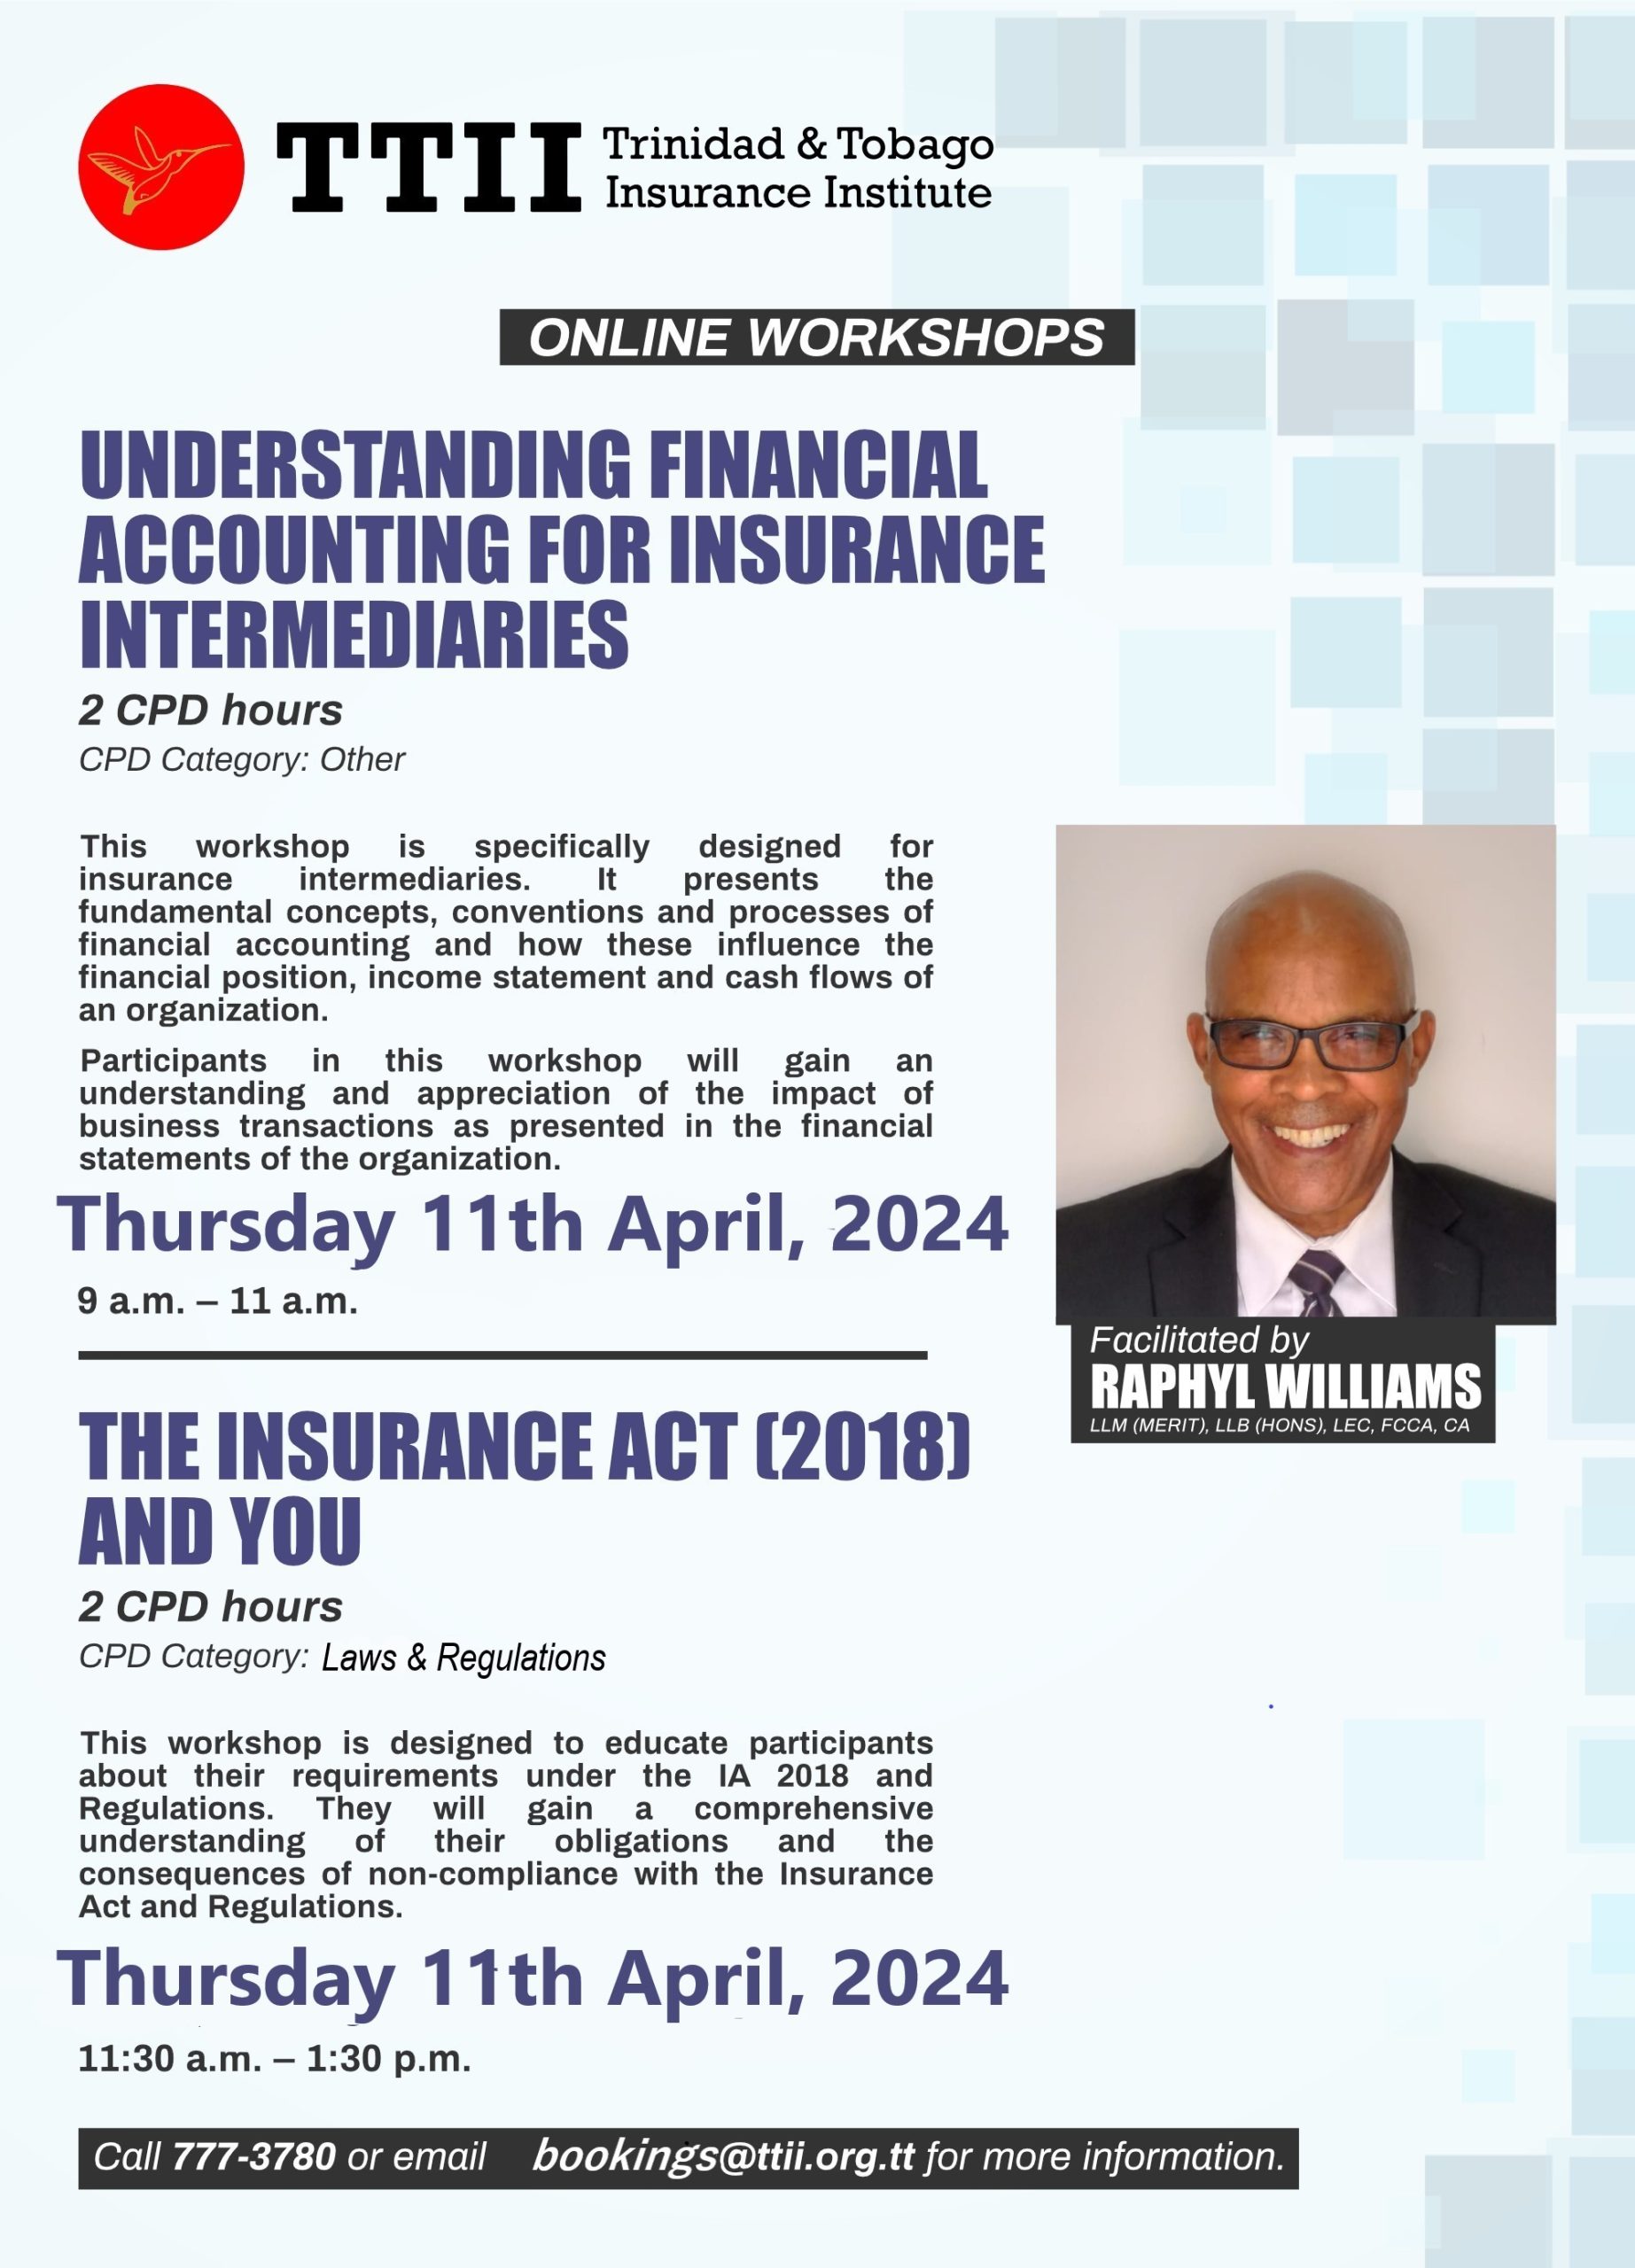 Understanding Financial Accounting for Insurance Intermediaries and the IA 2018 & You